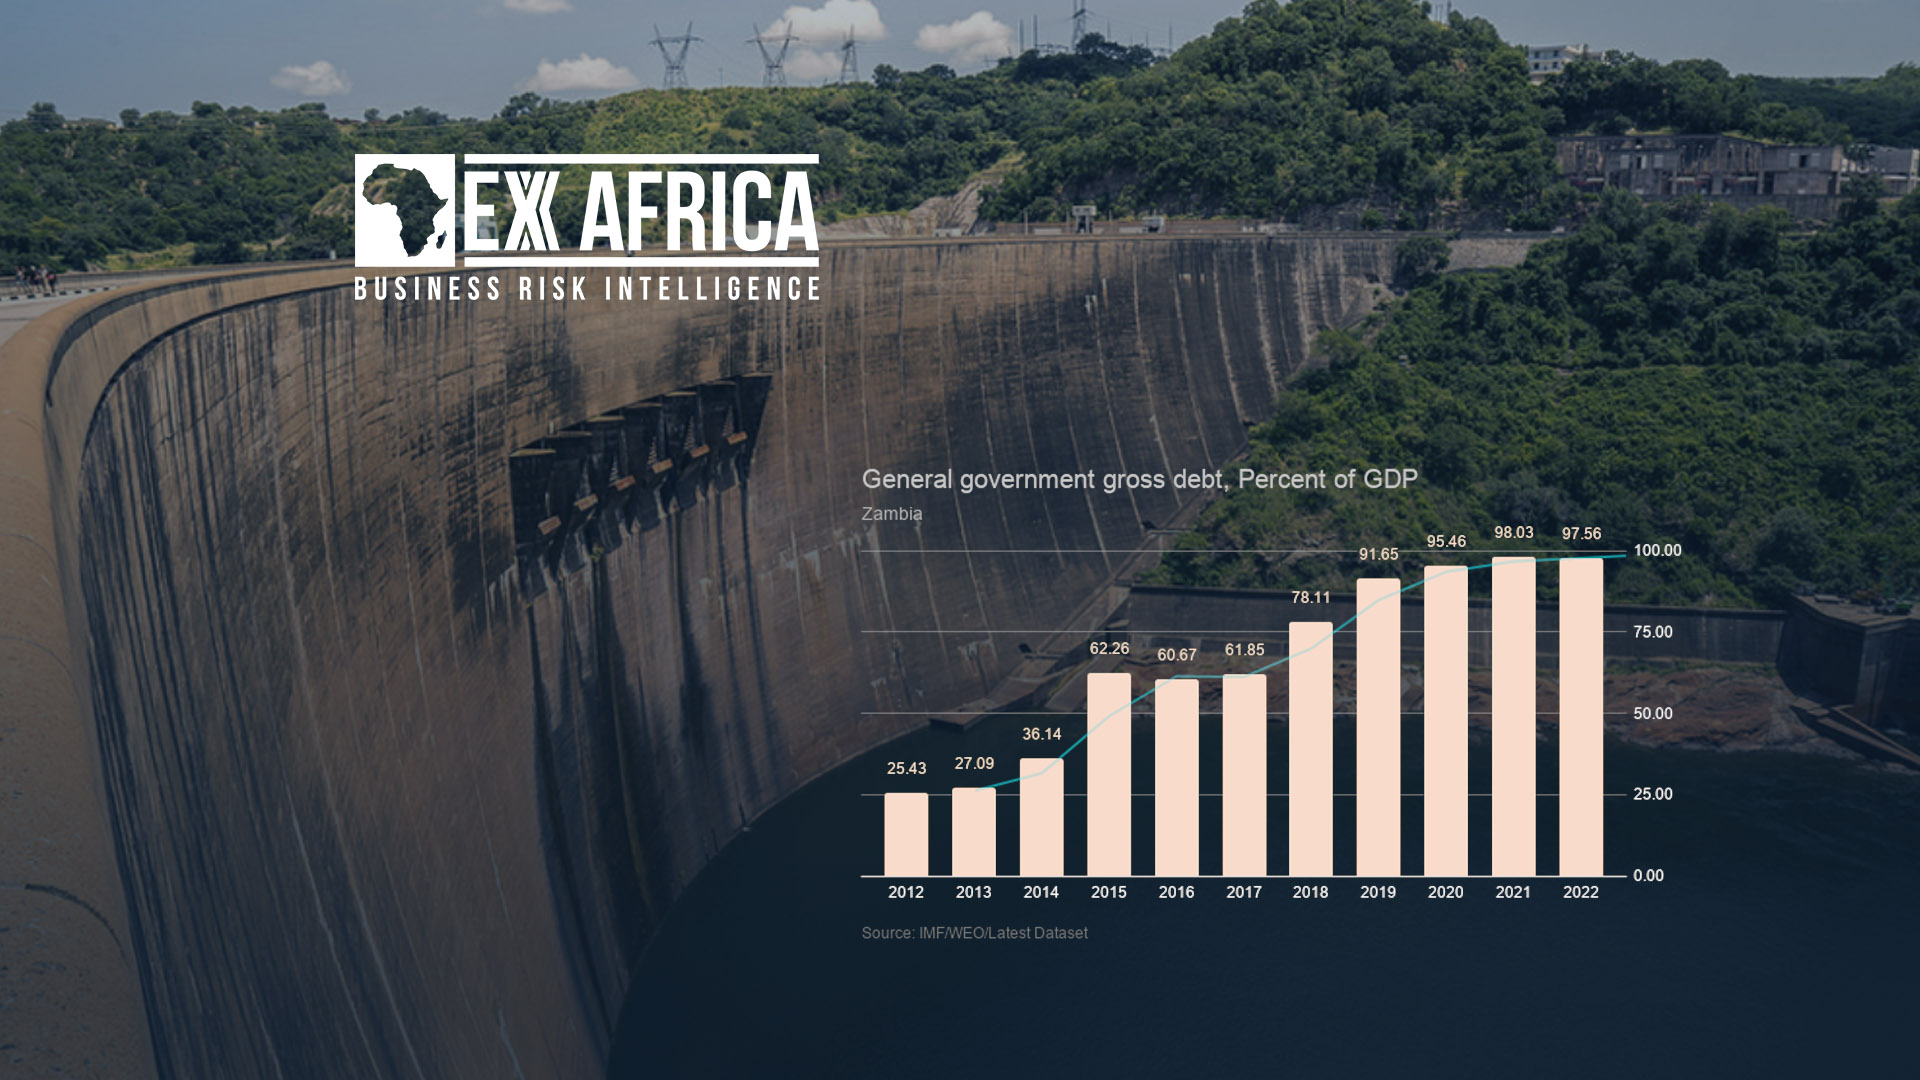 ZAMBIA: ‘LIGHT’ AT THE END OF THE DEBT TUNNEL?